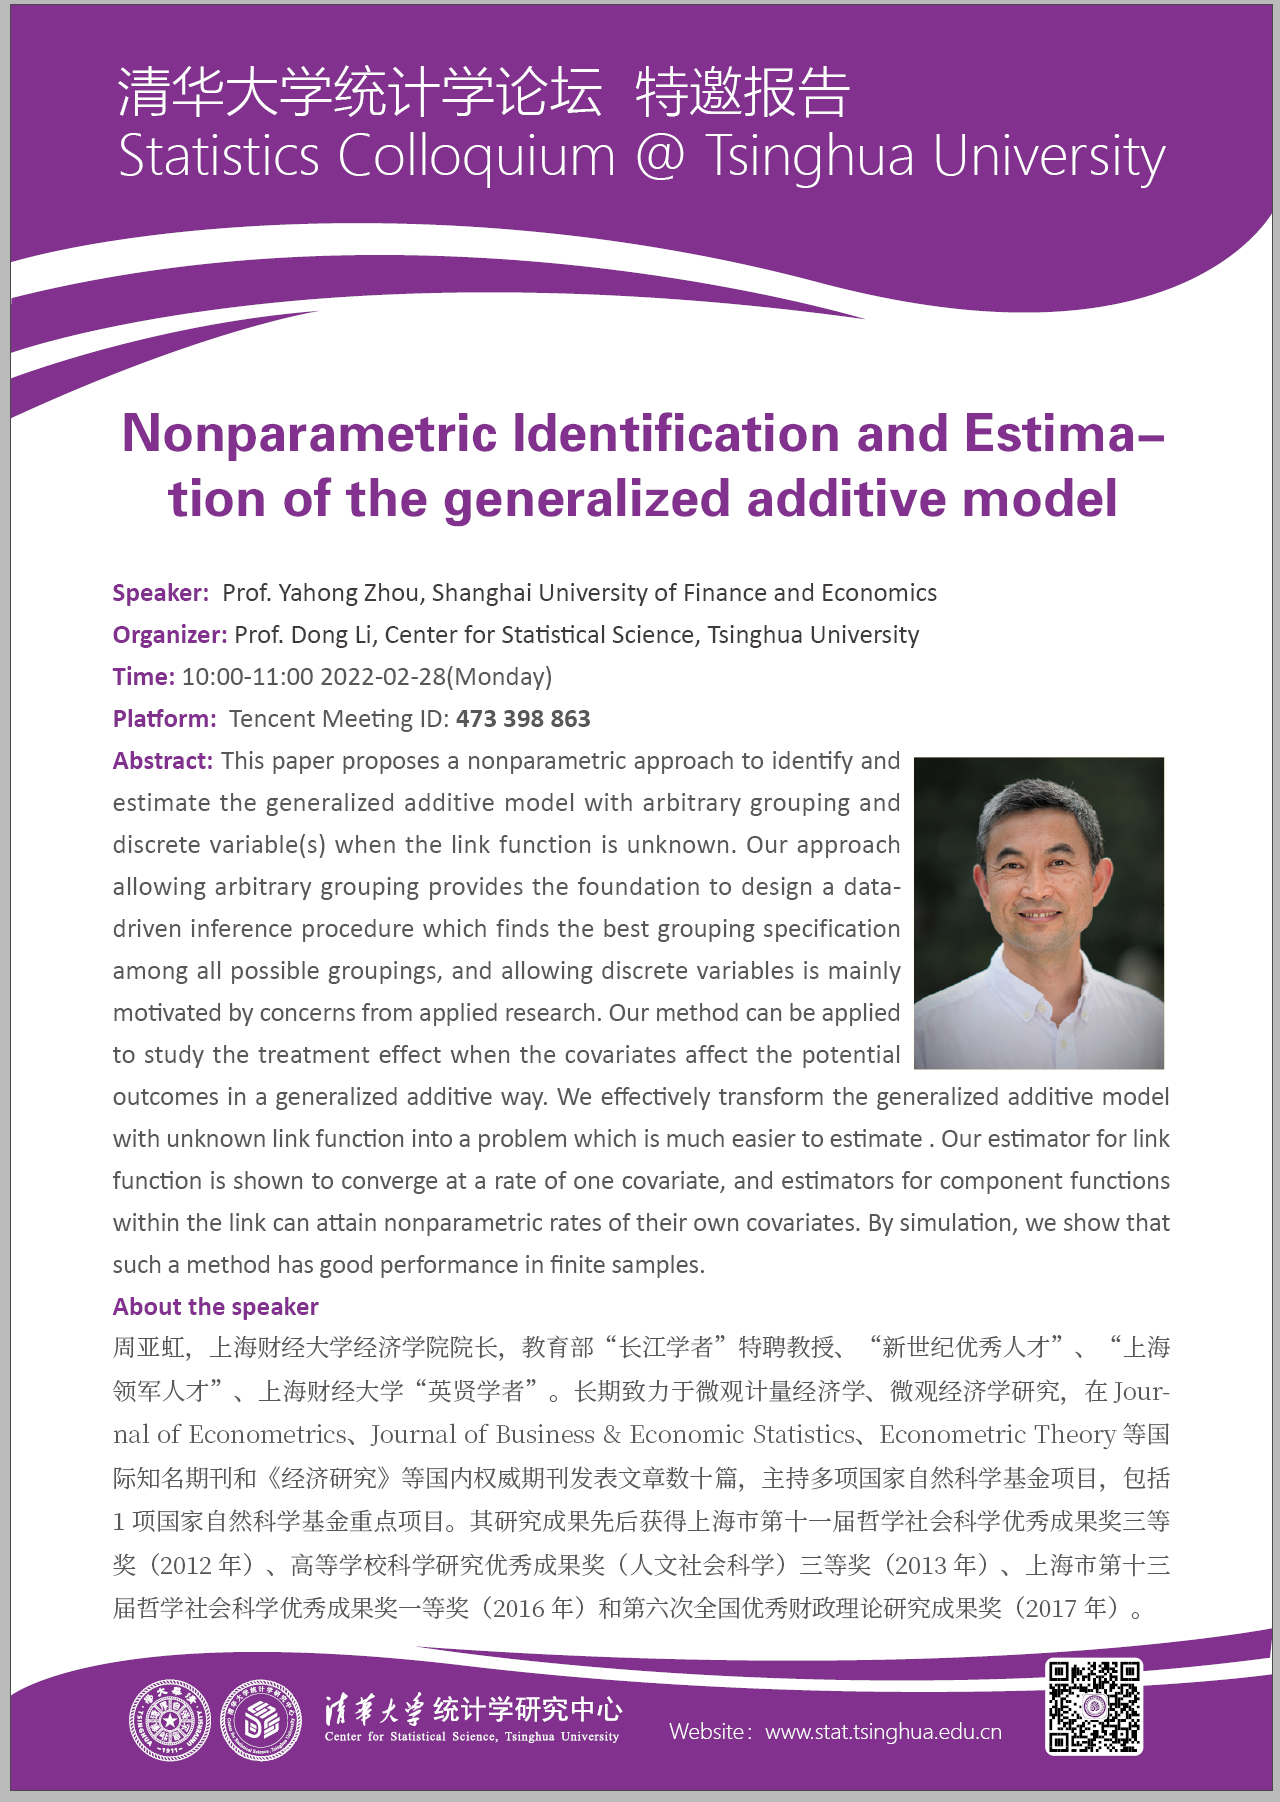 Nonparametric Identification and Estimation of the generalized additive model